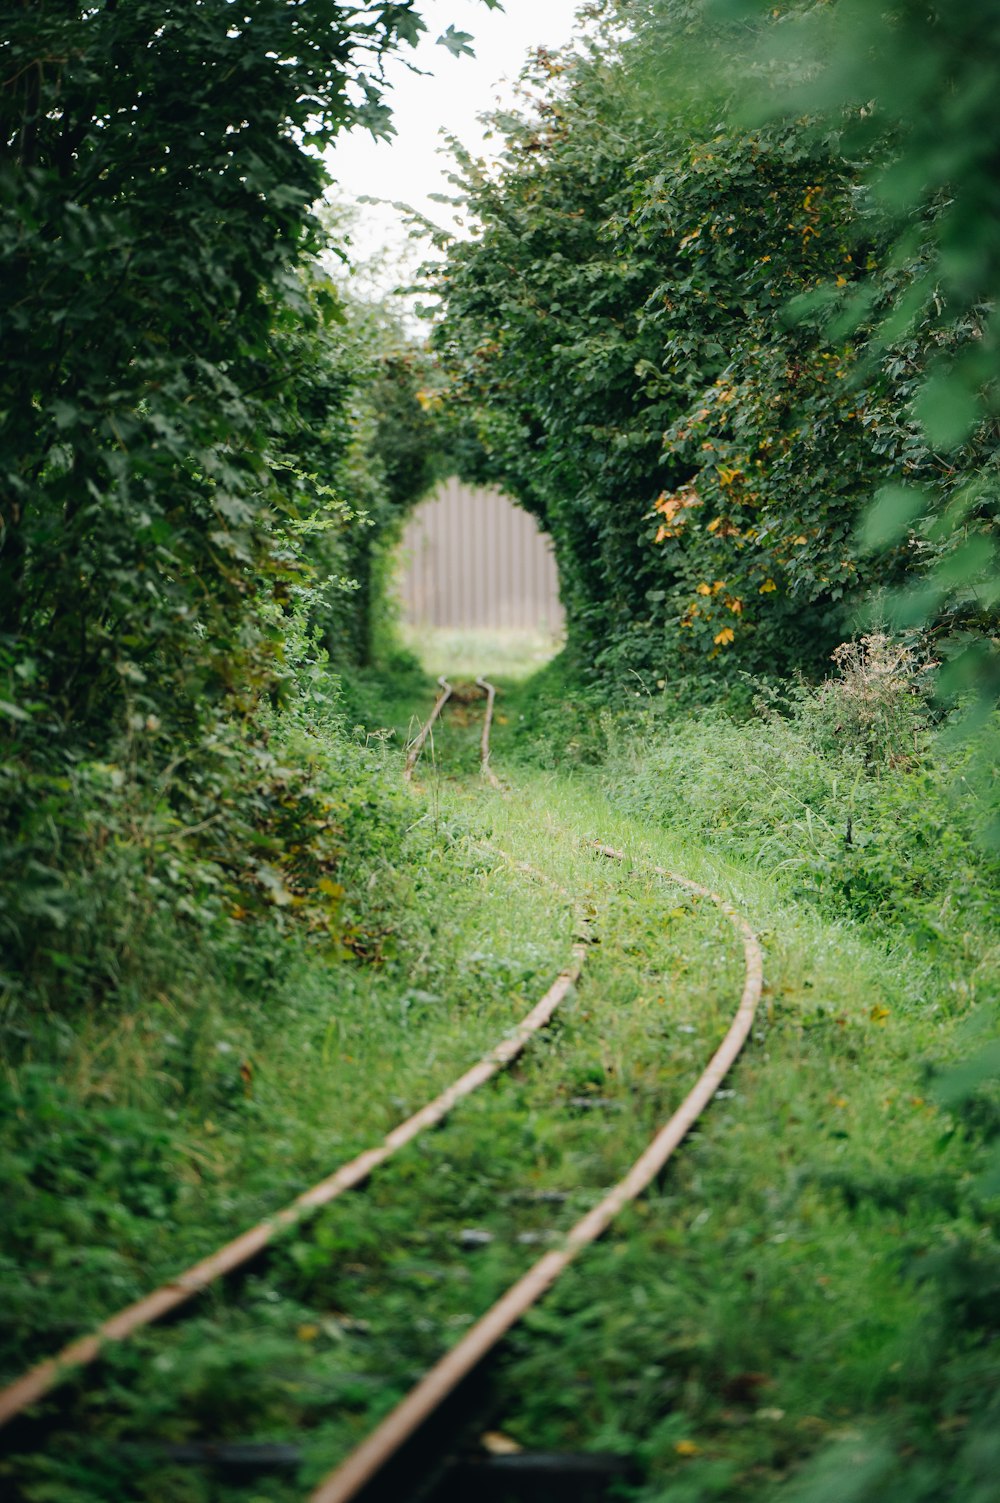 a train track going through a tunnel of trees